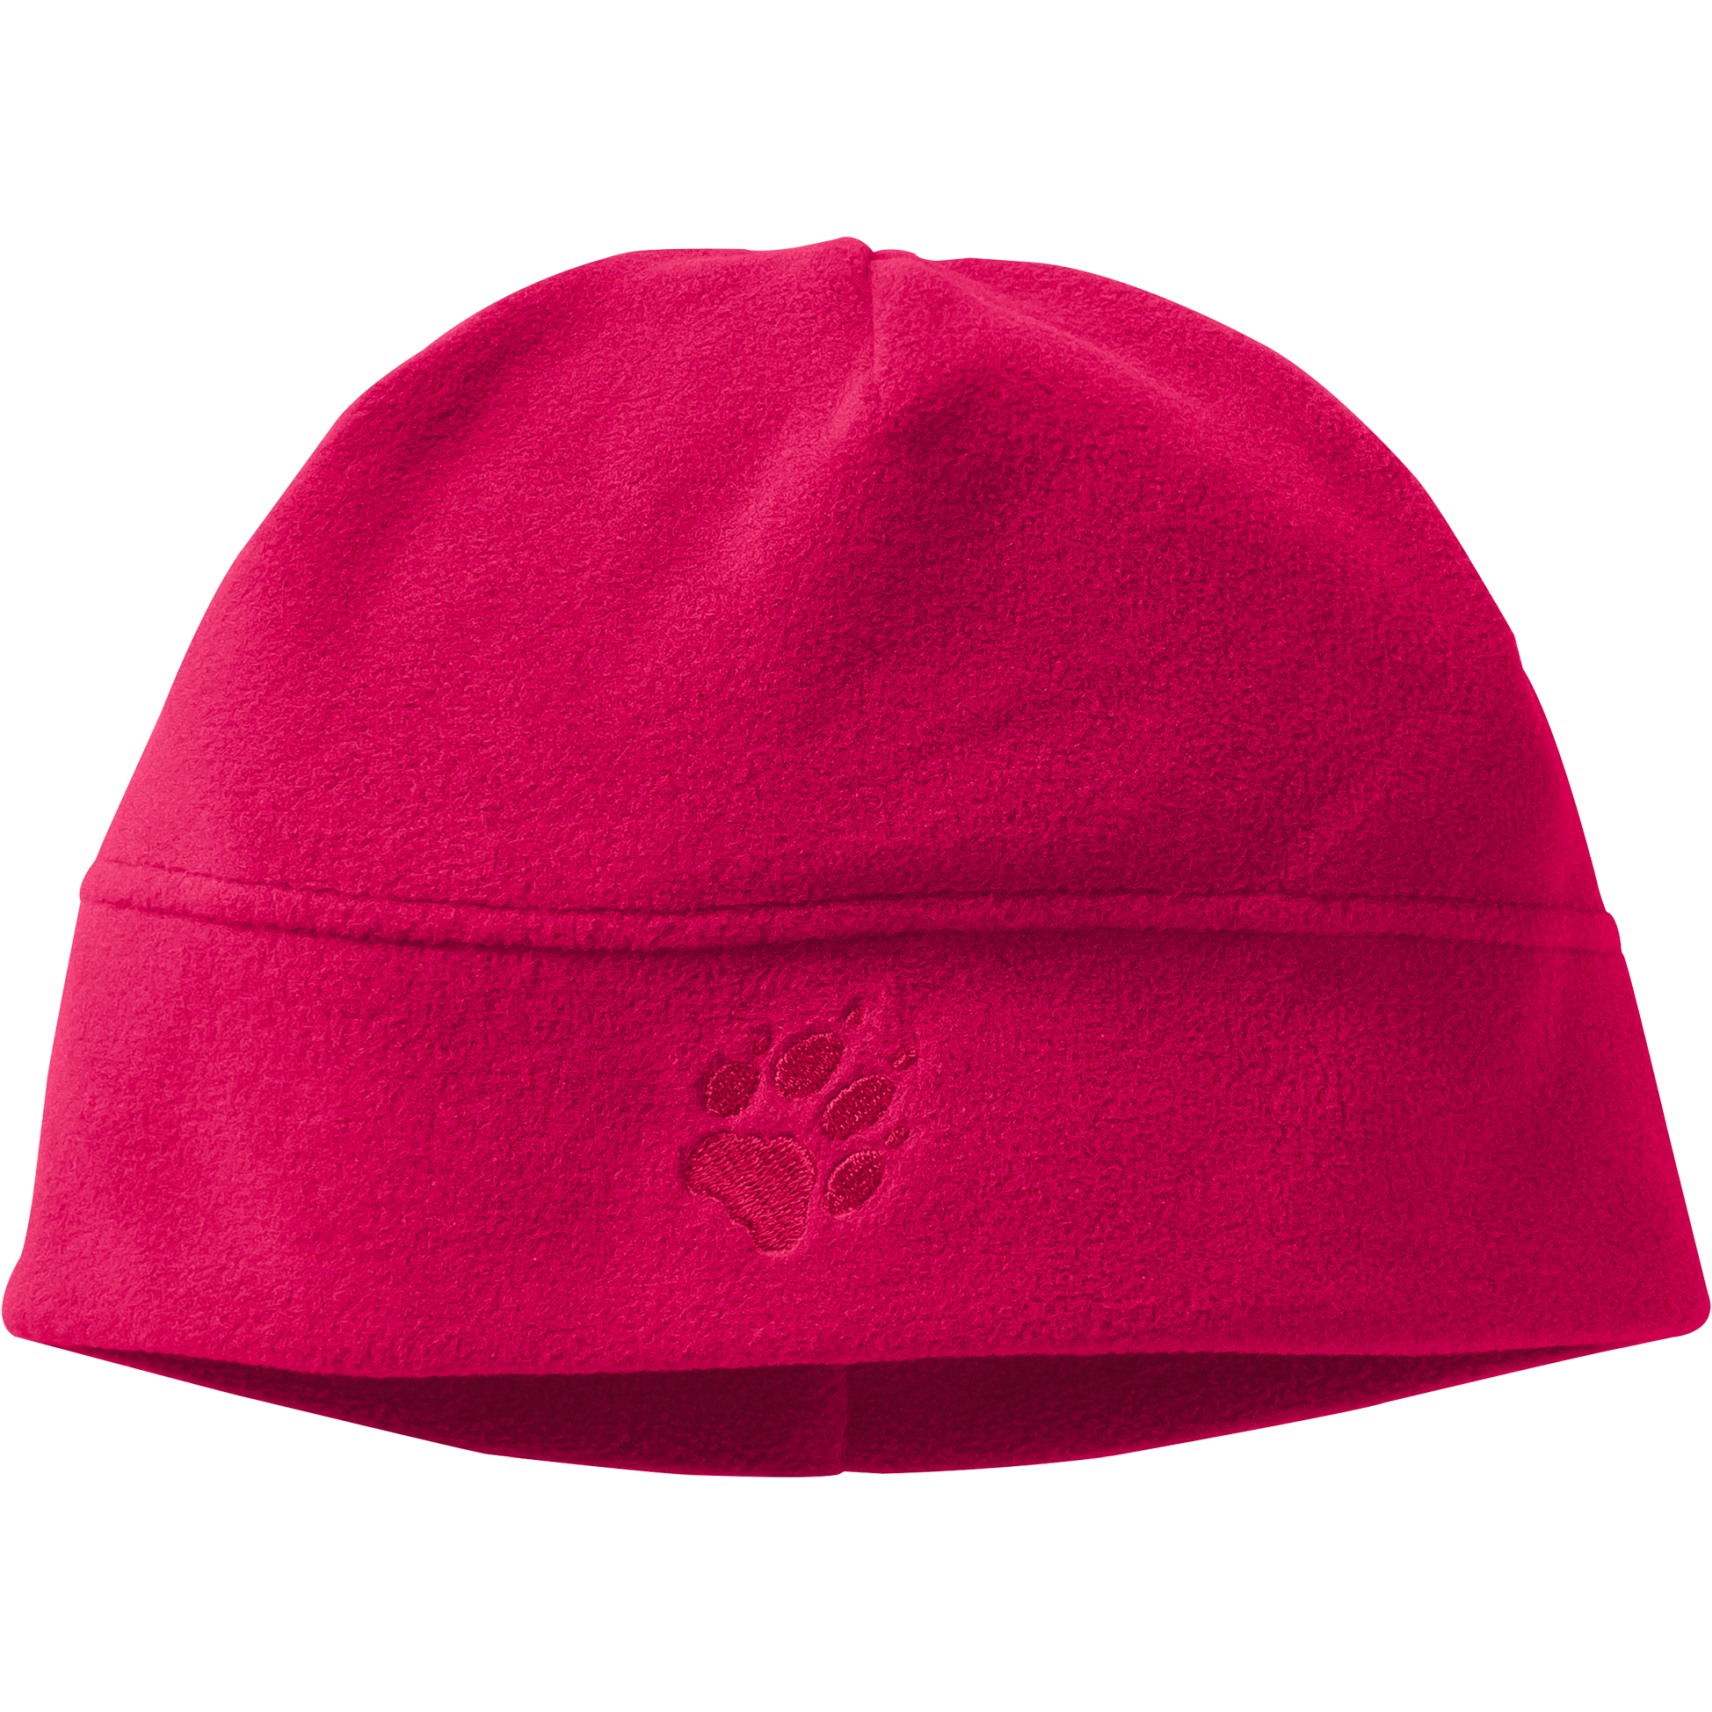 Picture of Jack Wolfskin Real Stuff Cap Kids - pink dahlia